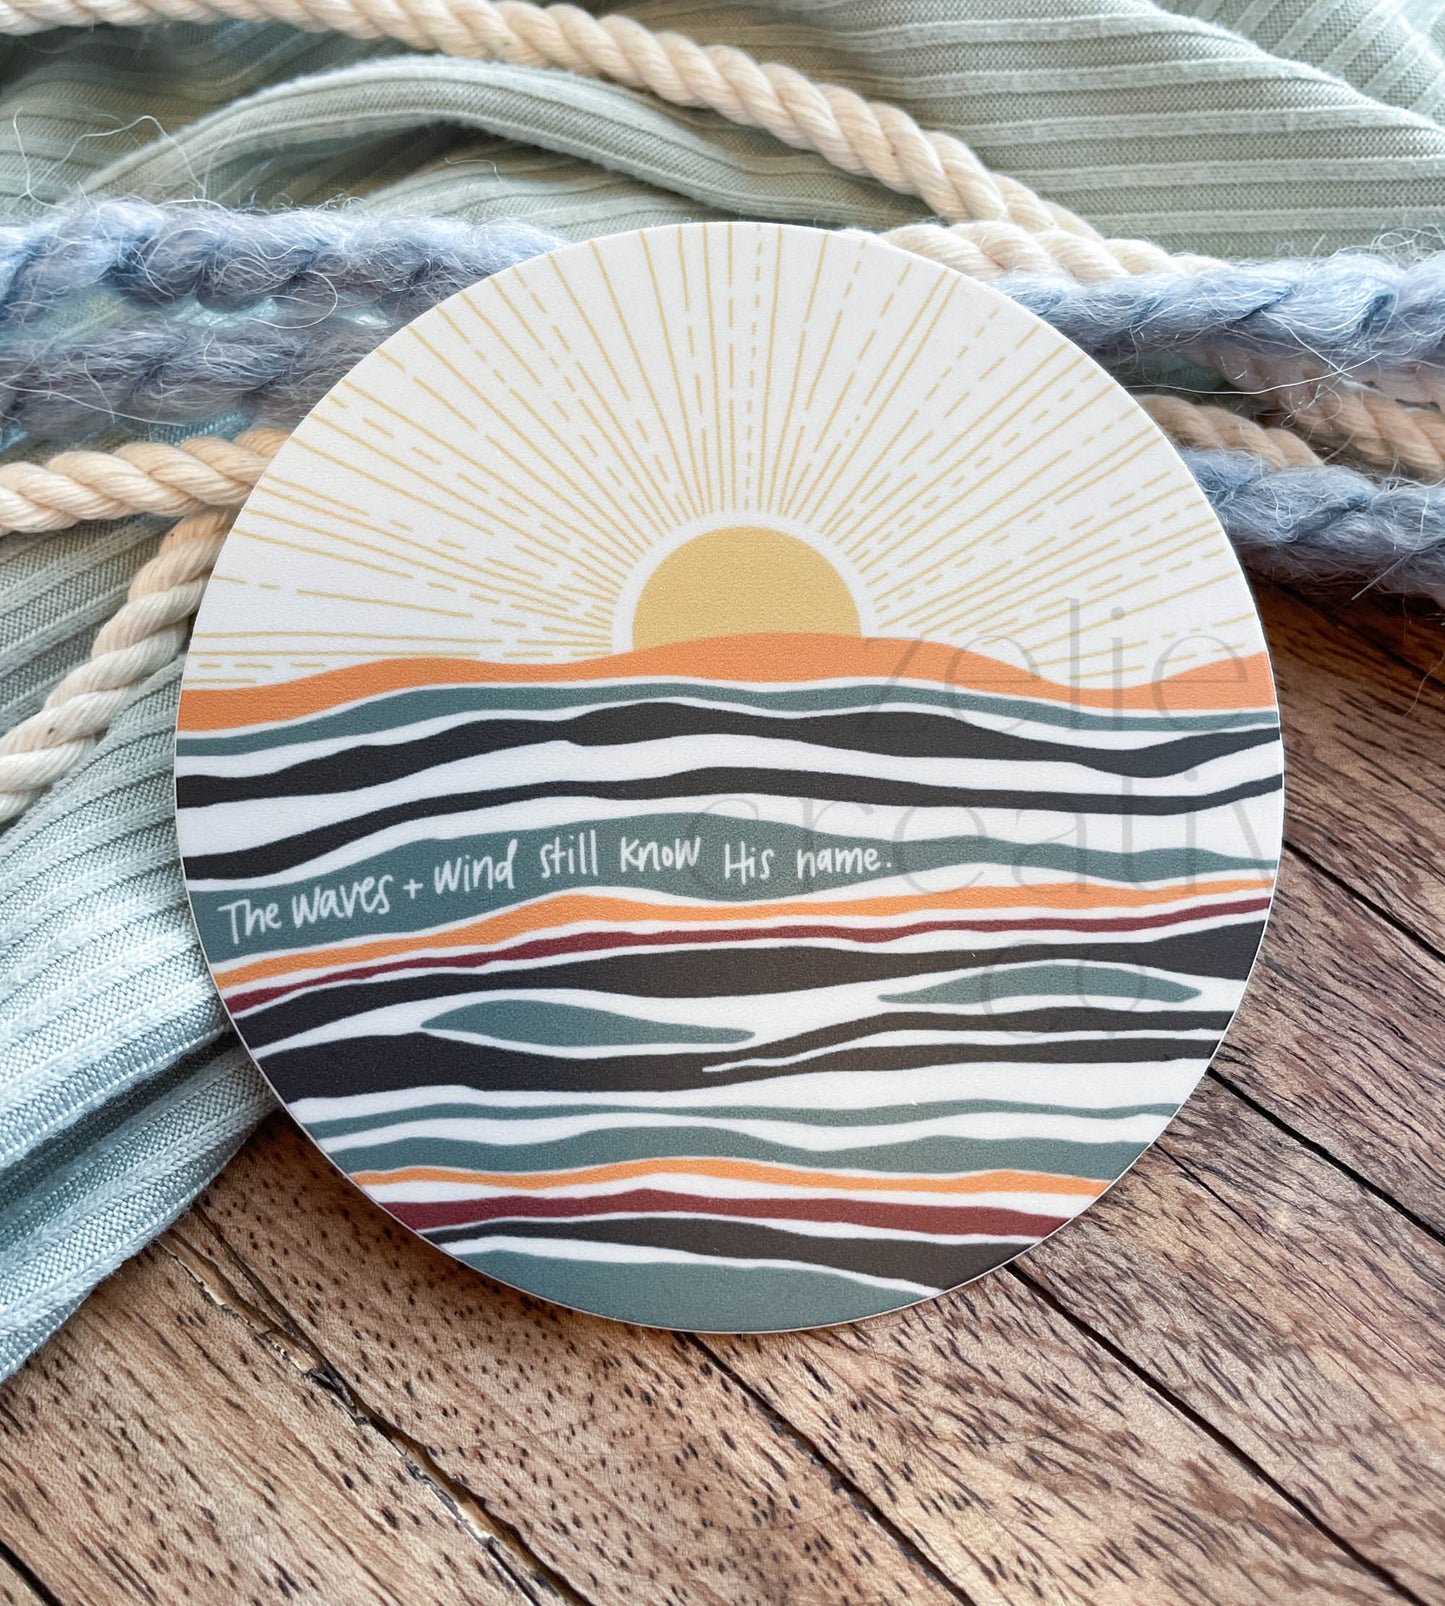 The waves & wind still know His name   |  Sticker